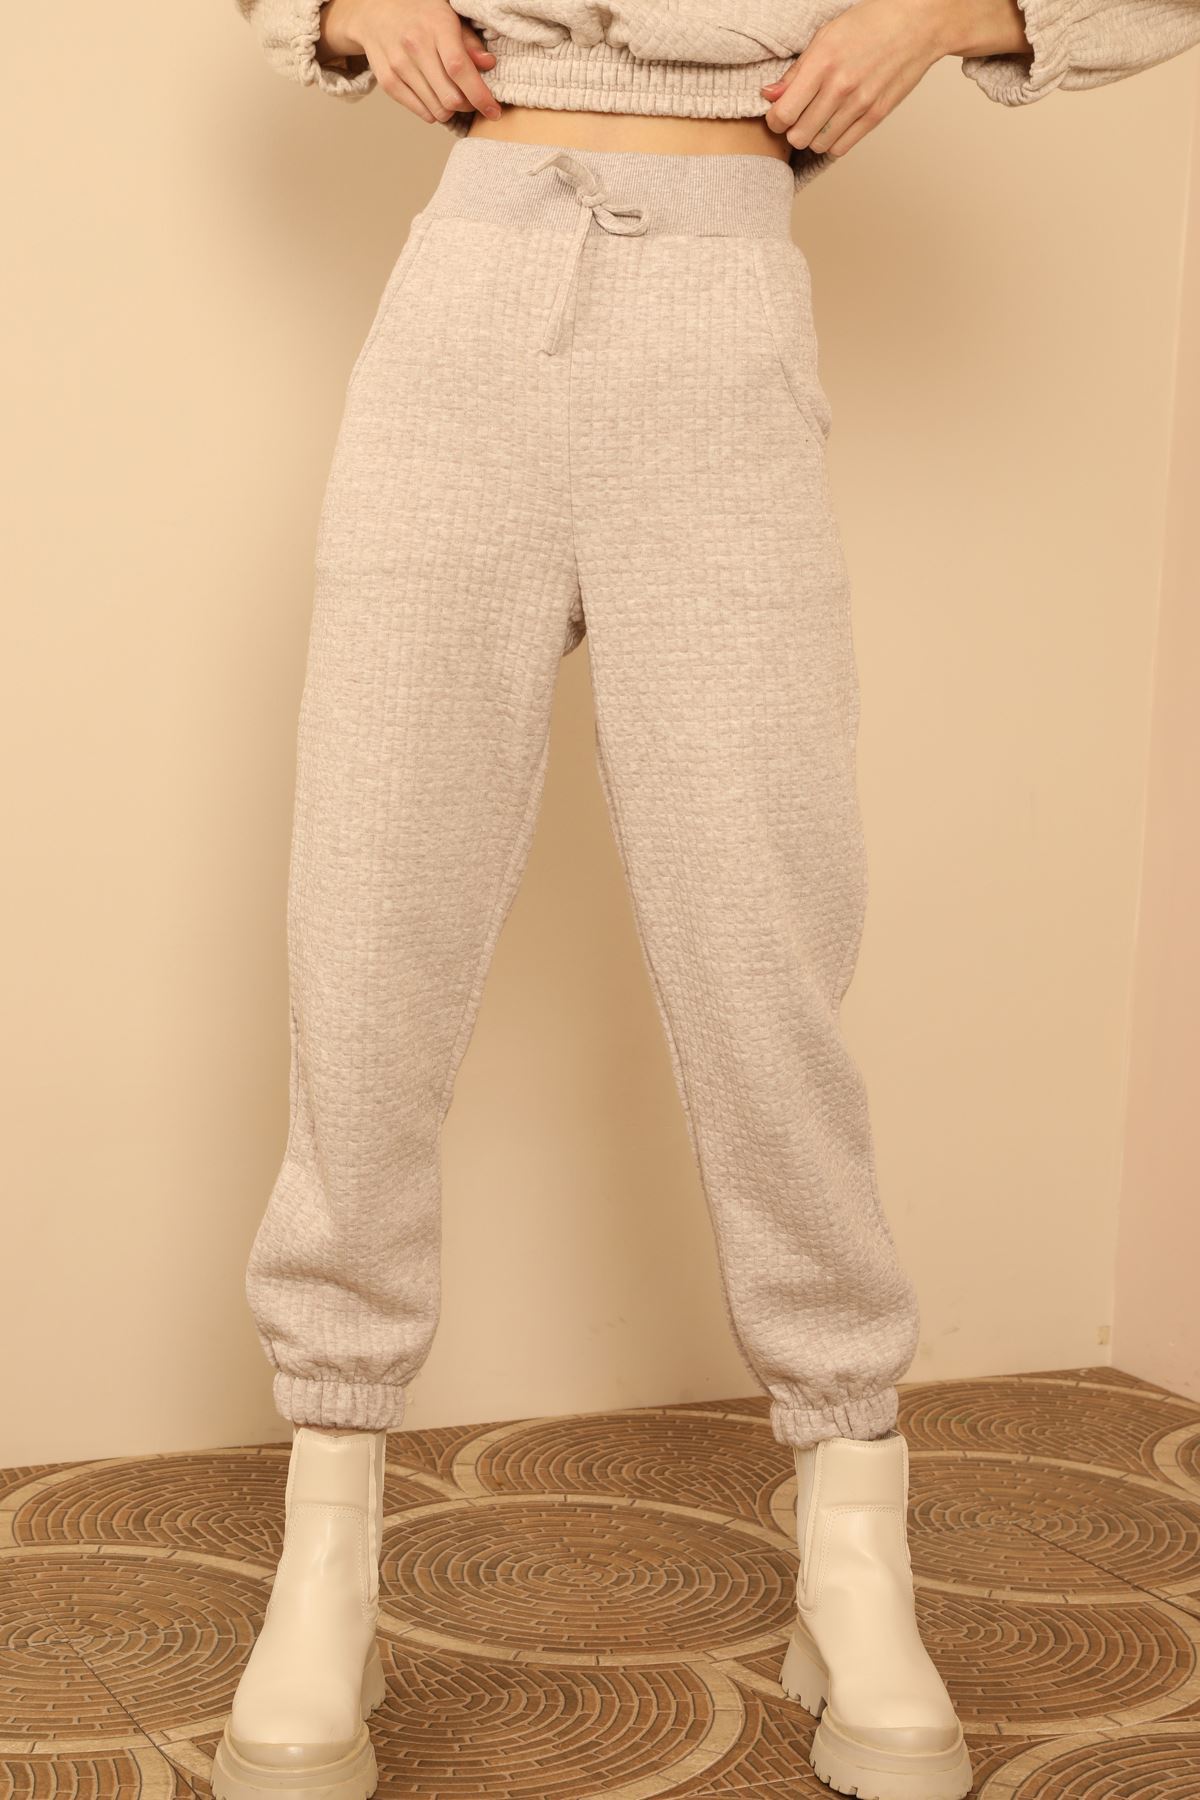 Honeycomb Fabric Ankle Length Comfy Fit Women'S Sweatpant - Beige 